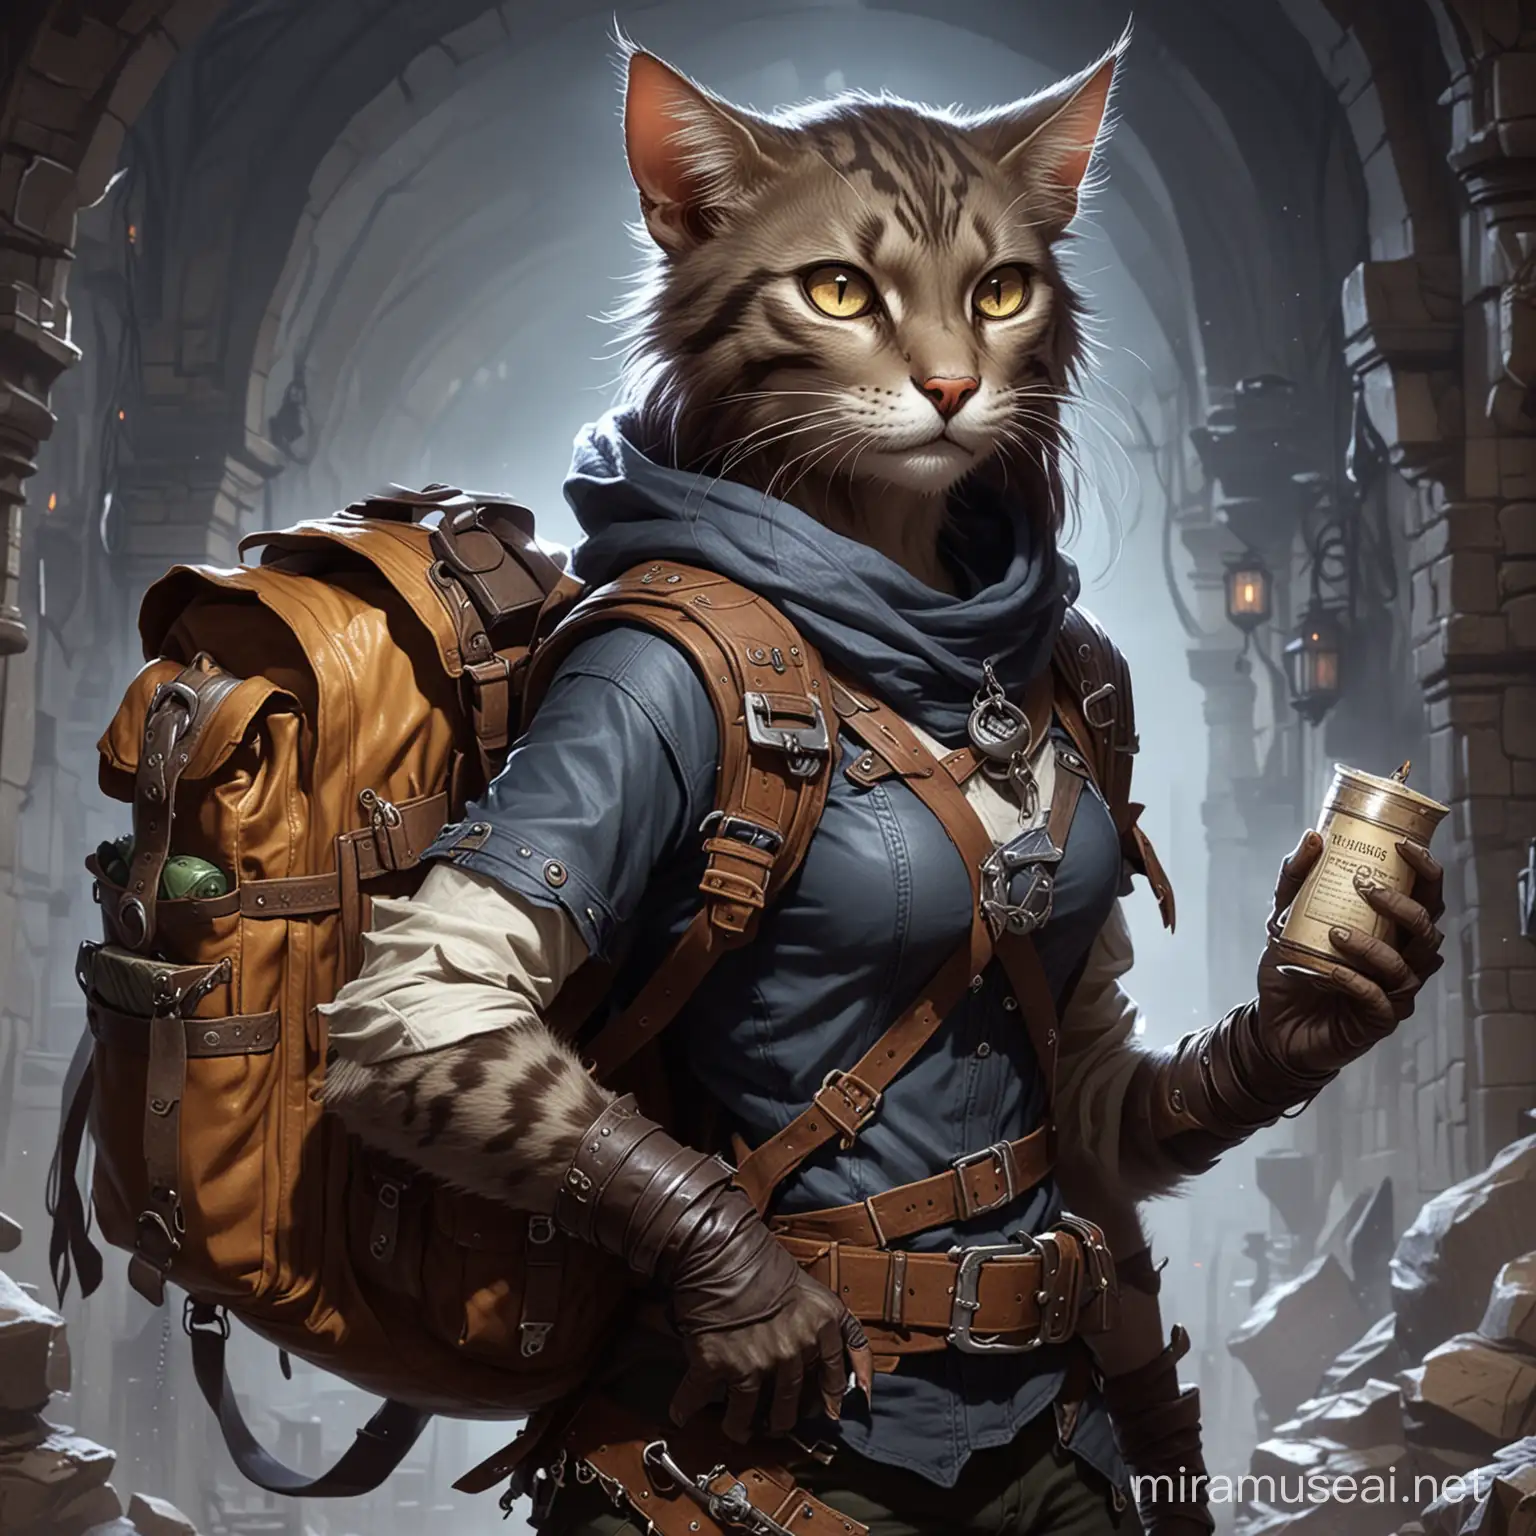 A female werecat who is a thief and has many items in a backpack in dungeons and dragons